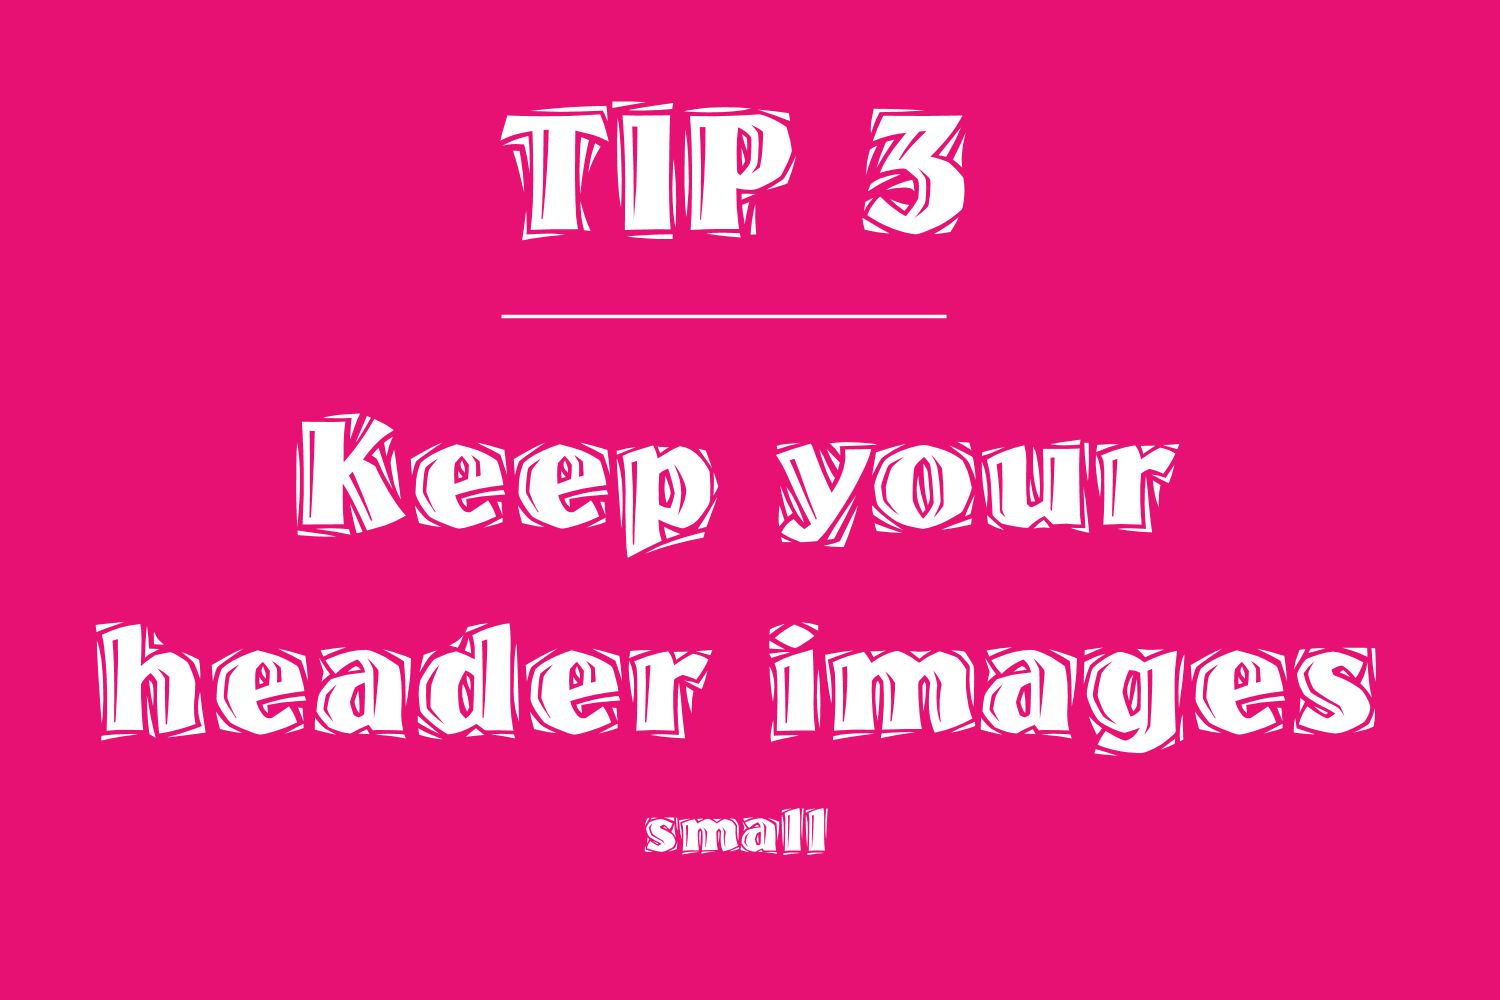 Tip 3 small headers